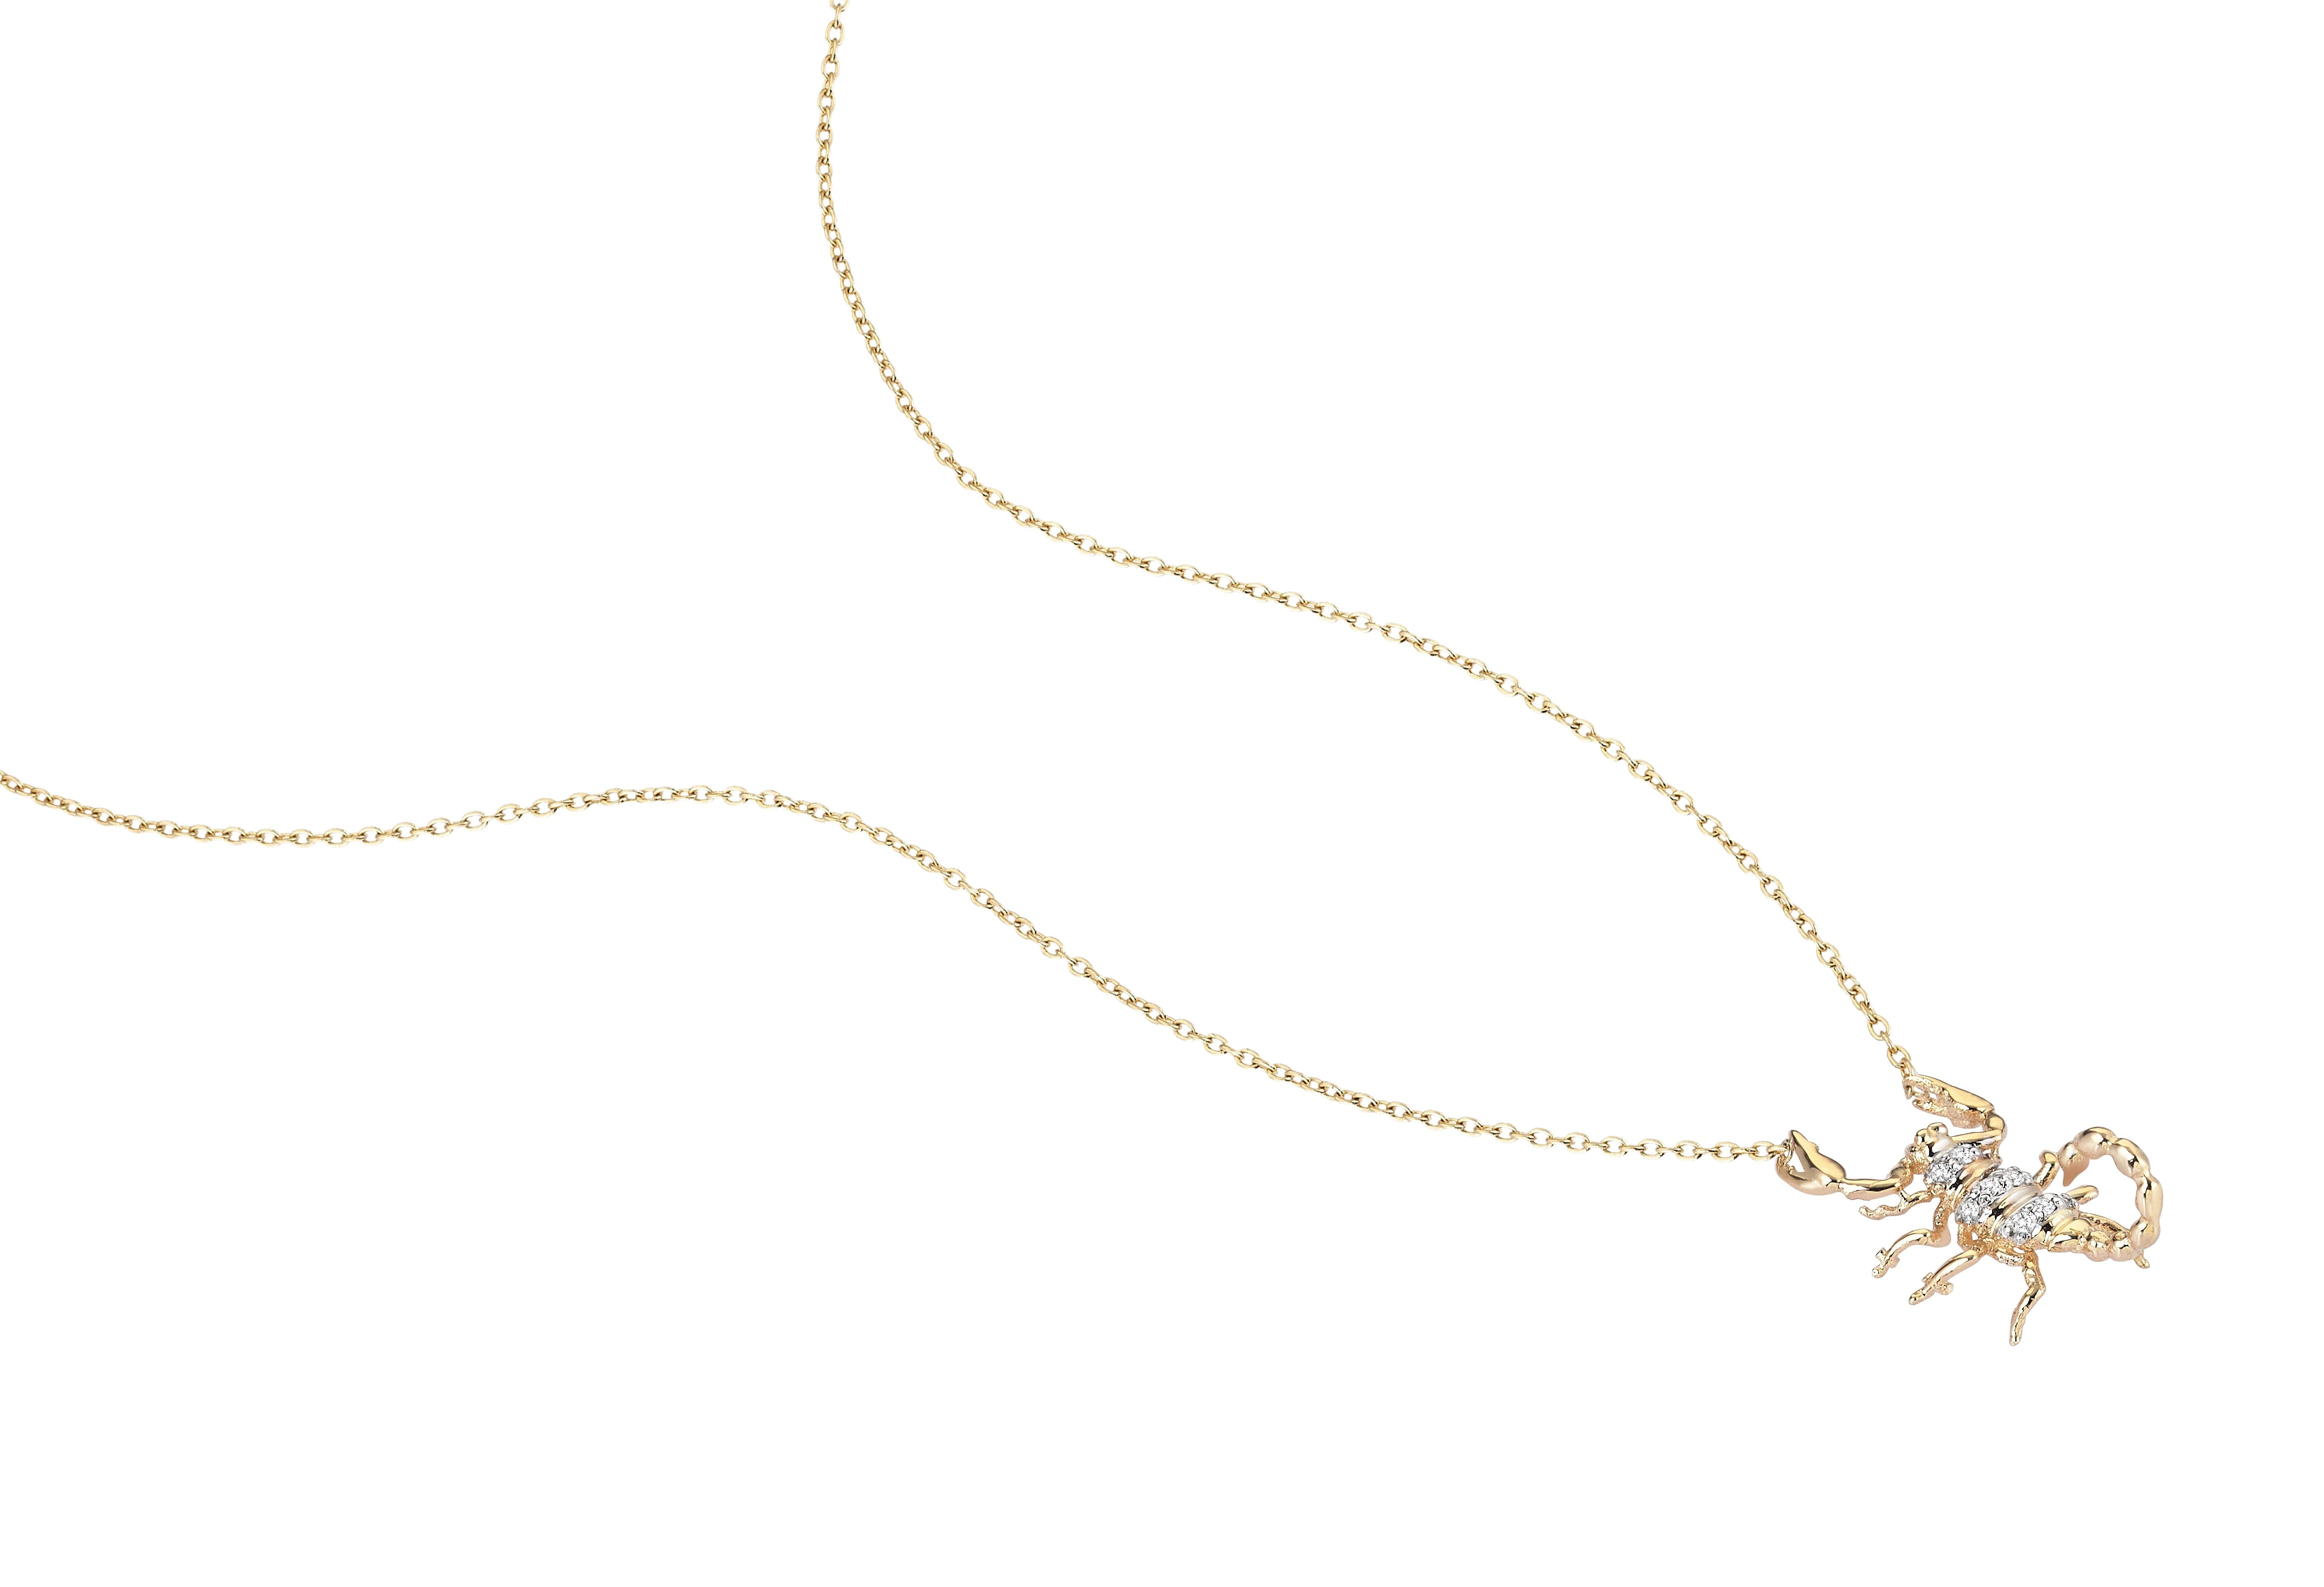 Scorpion Necklace in Yellow Gold - Her Story Shop